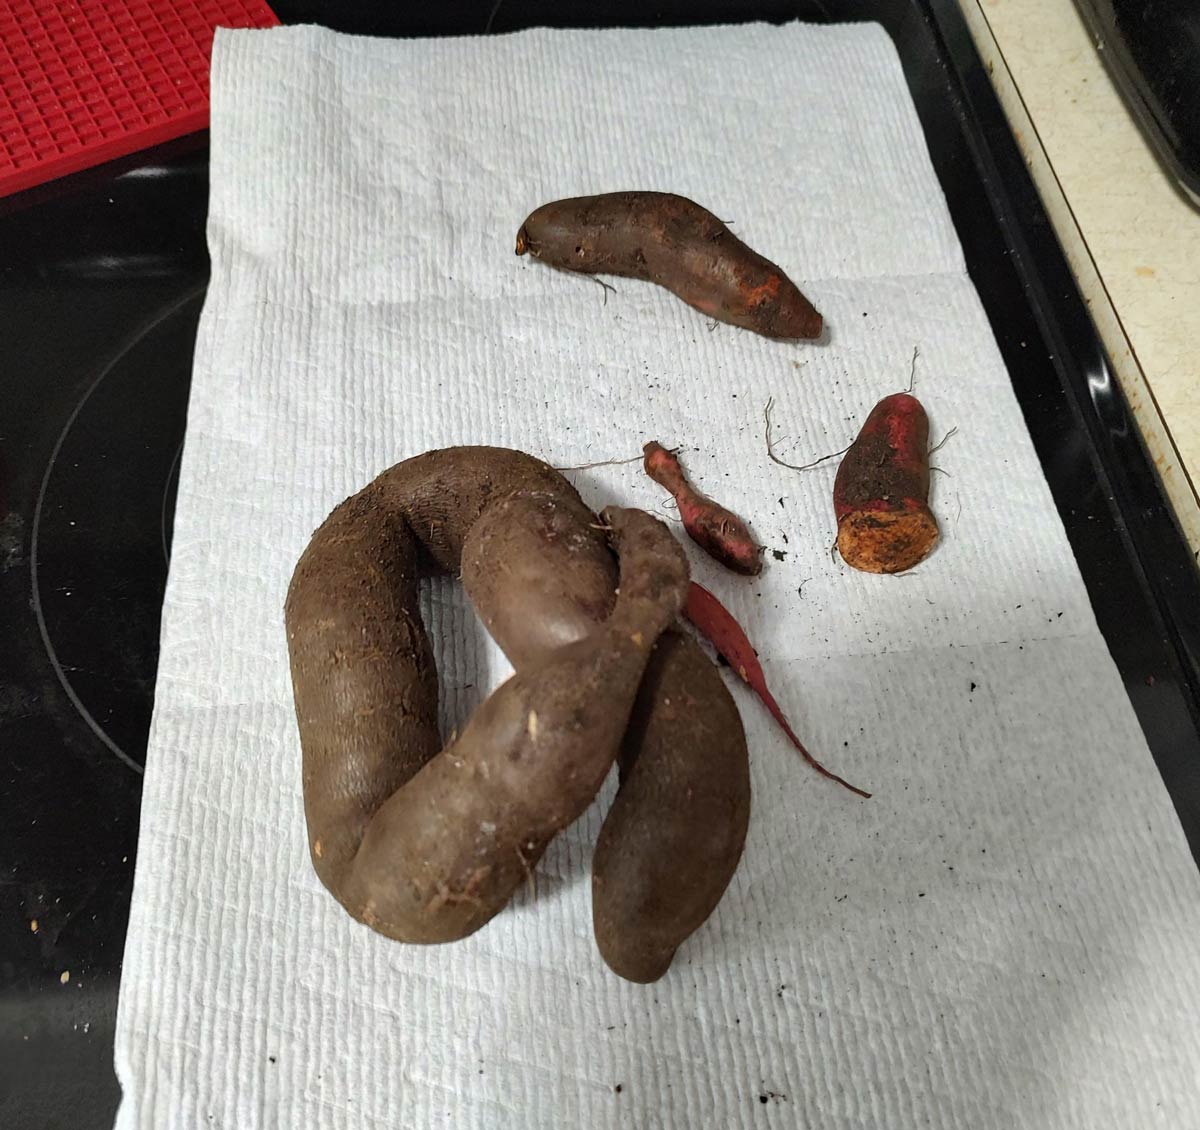 Our sweet potato harvest this year